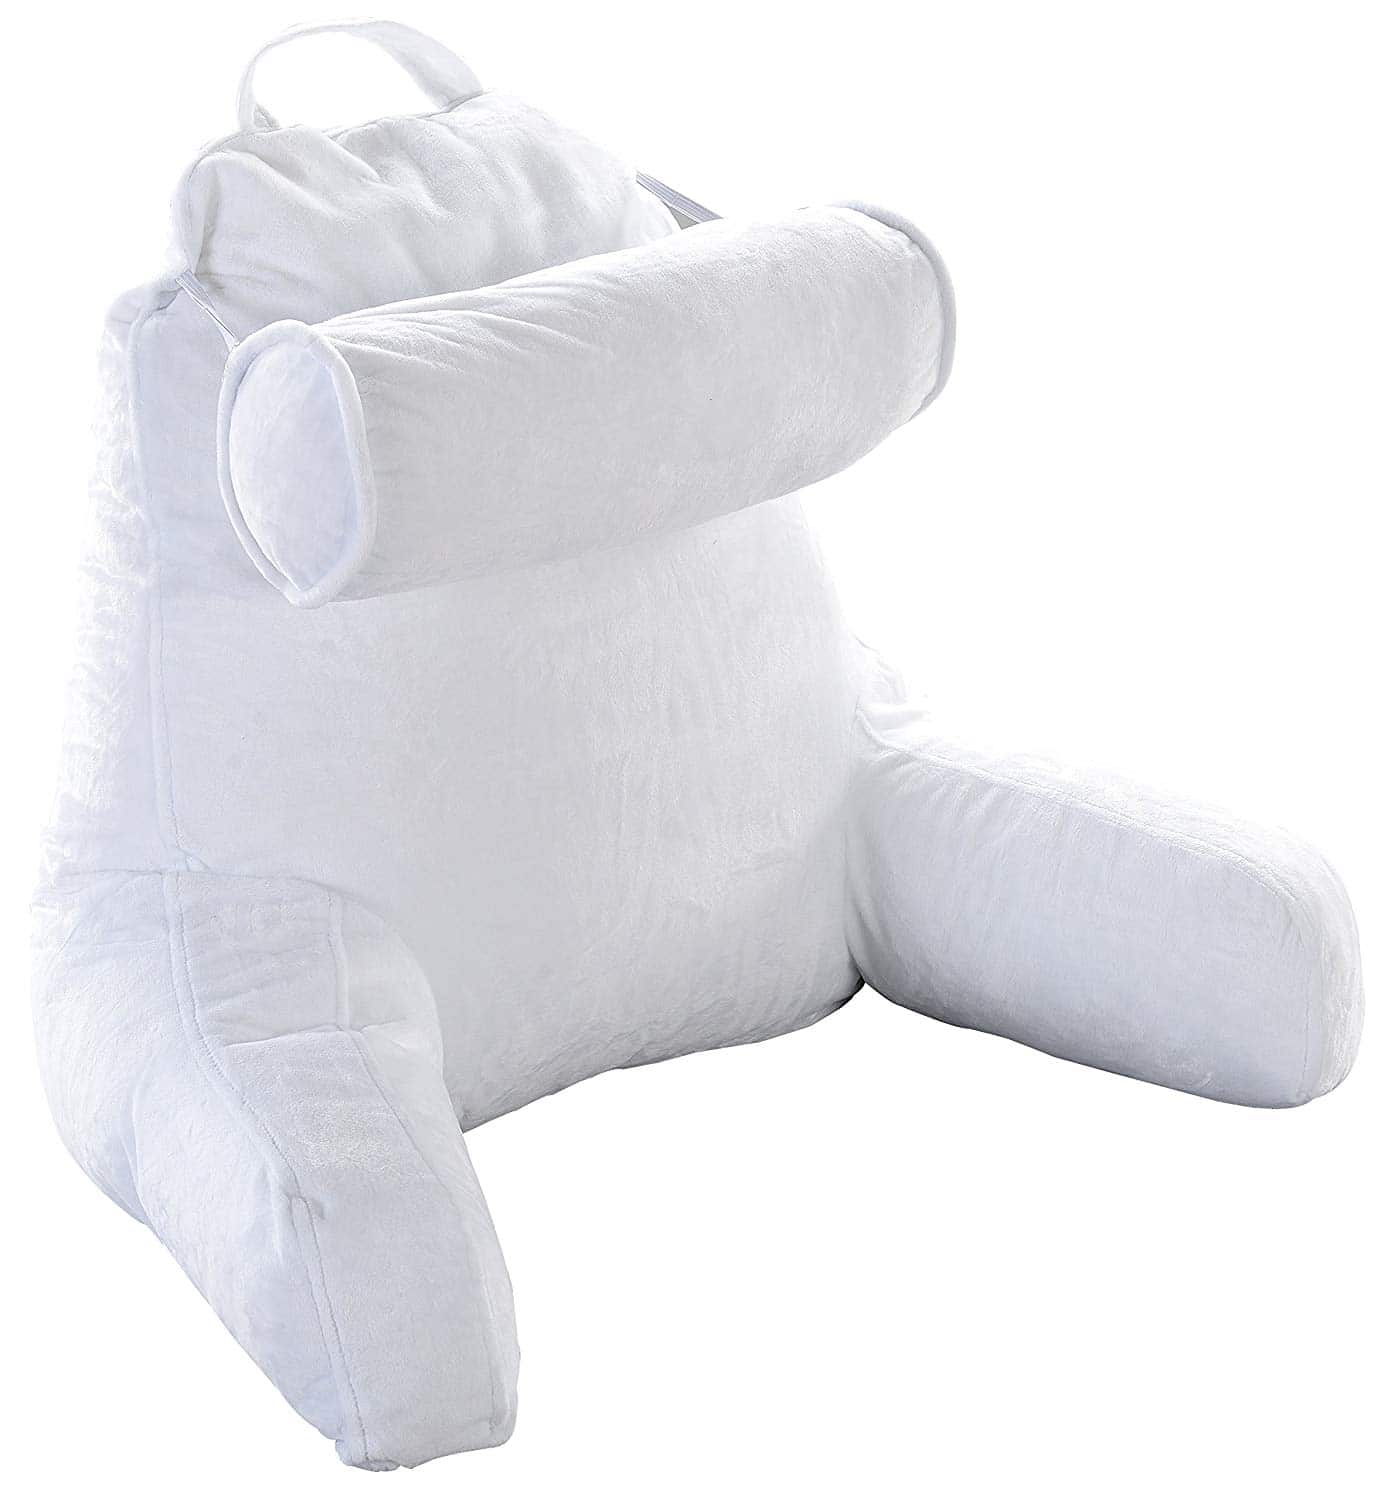 Top 10 Best Rest Pillows in 2023 Reviews Home & Kitchen